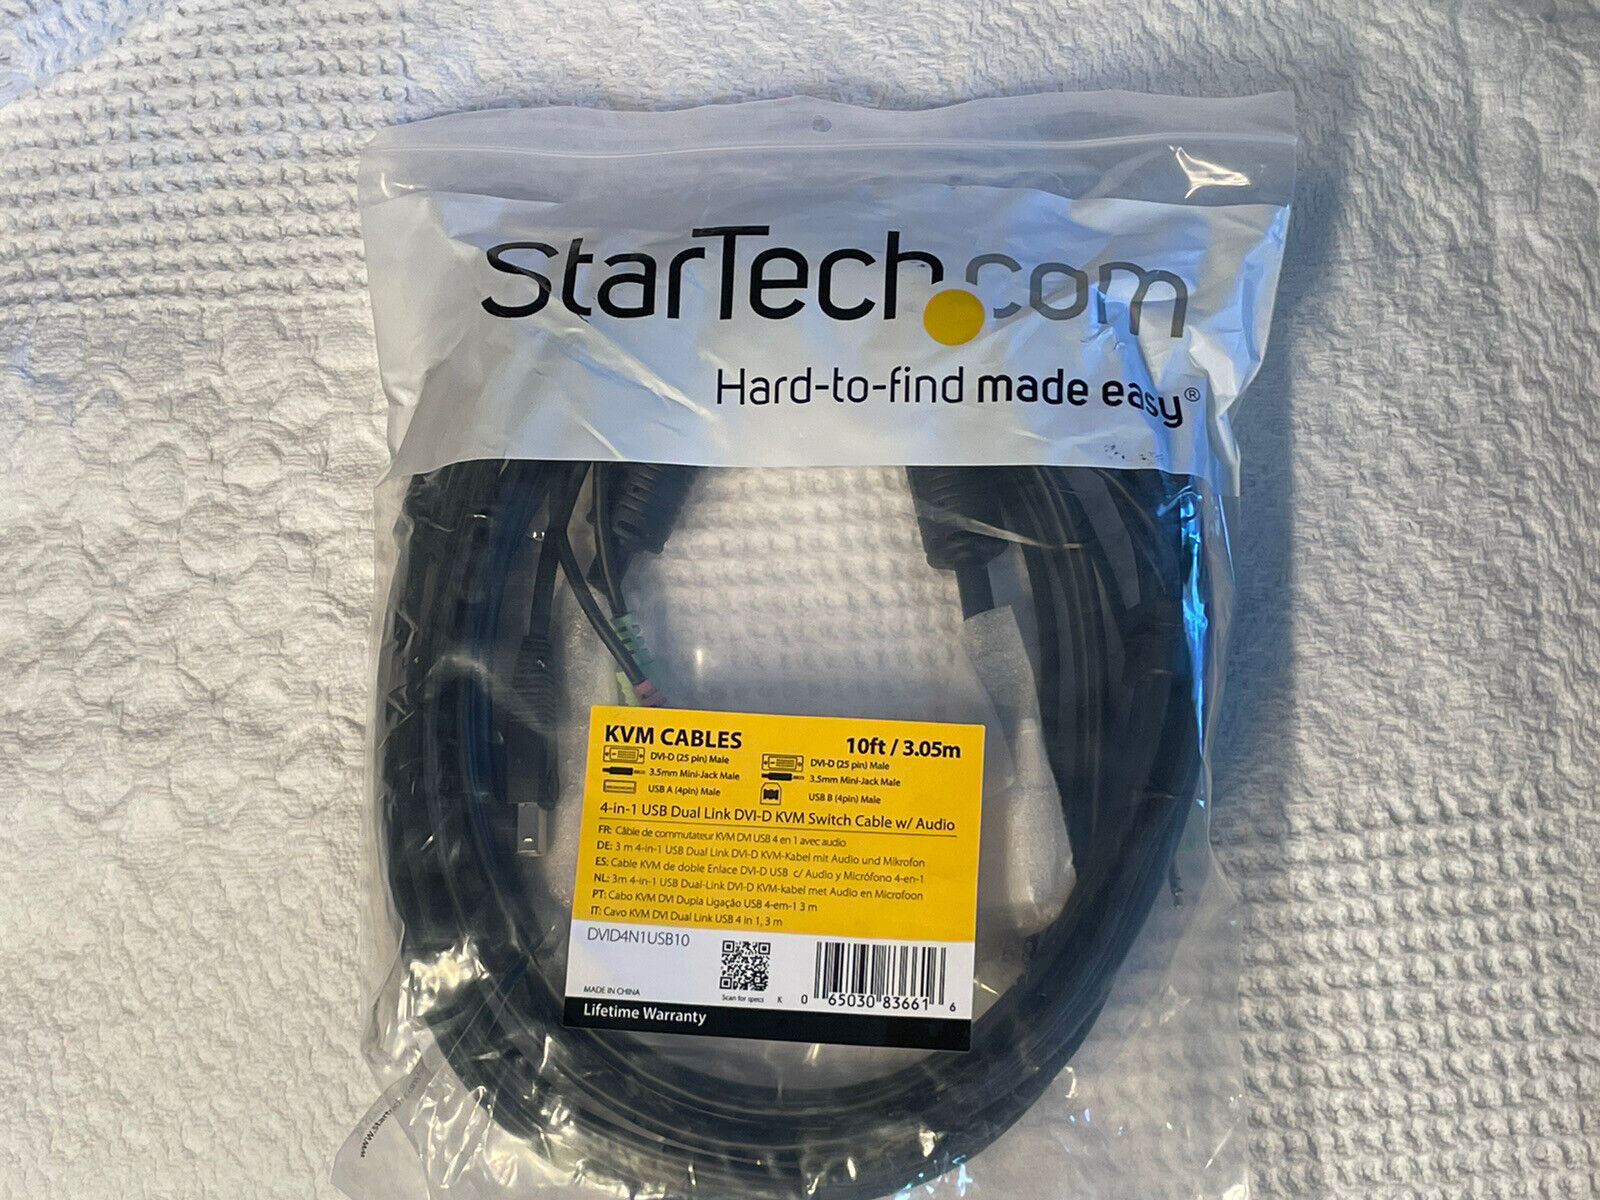 StarTech.com ~4 In 1 USB Dual Link DVI-D KVM Switch Cable W/Audio~ 10 Foot New